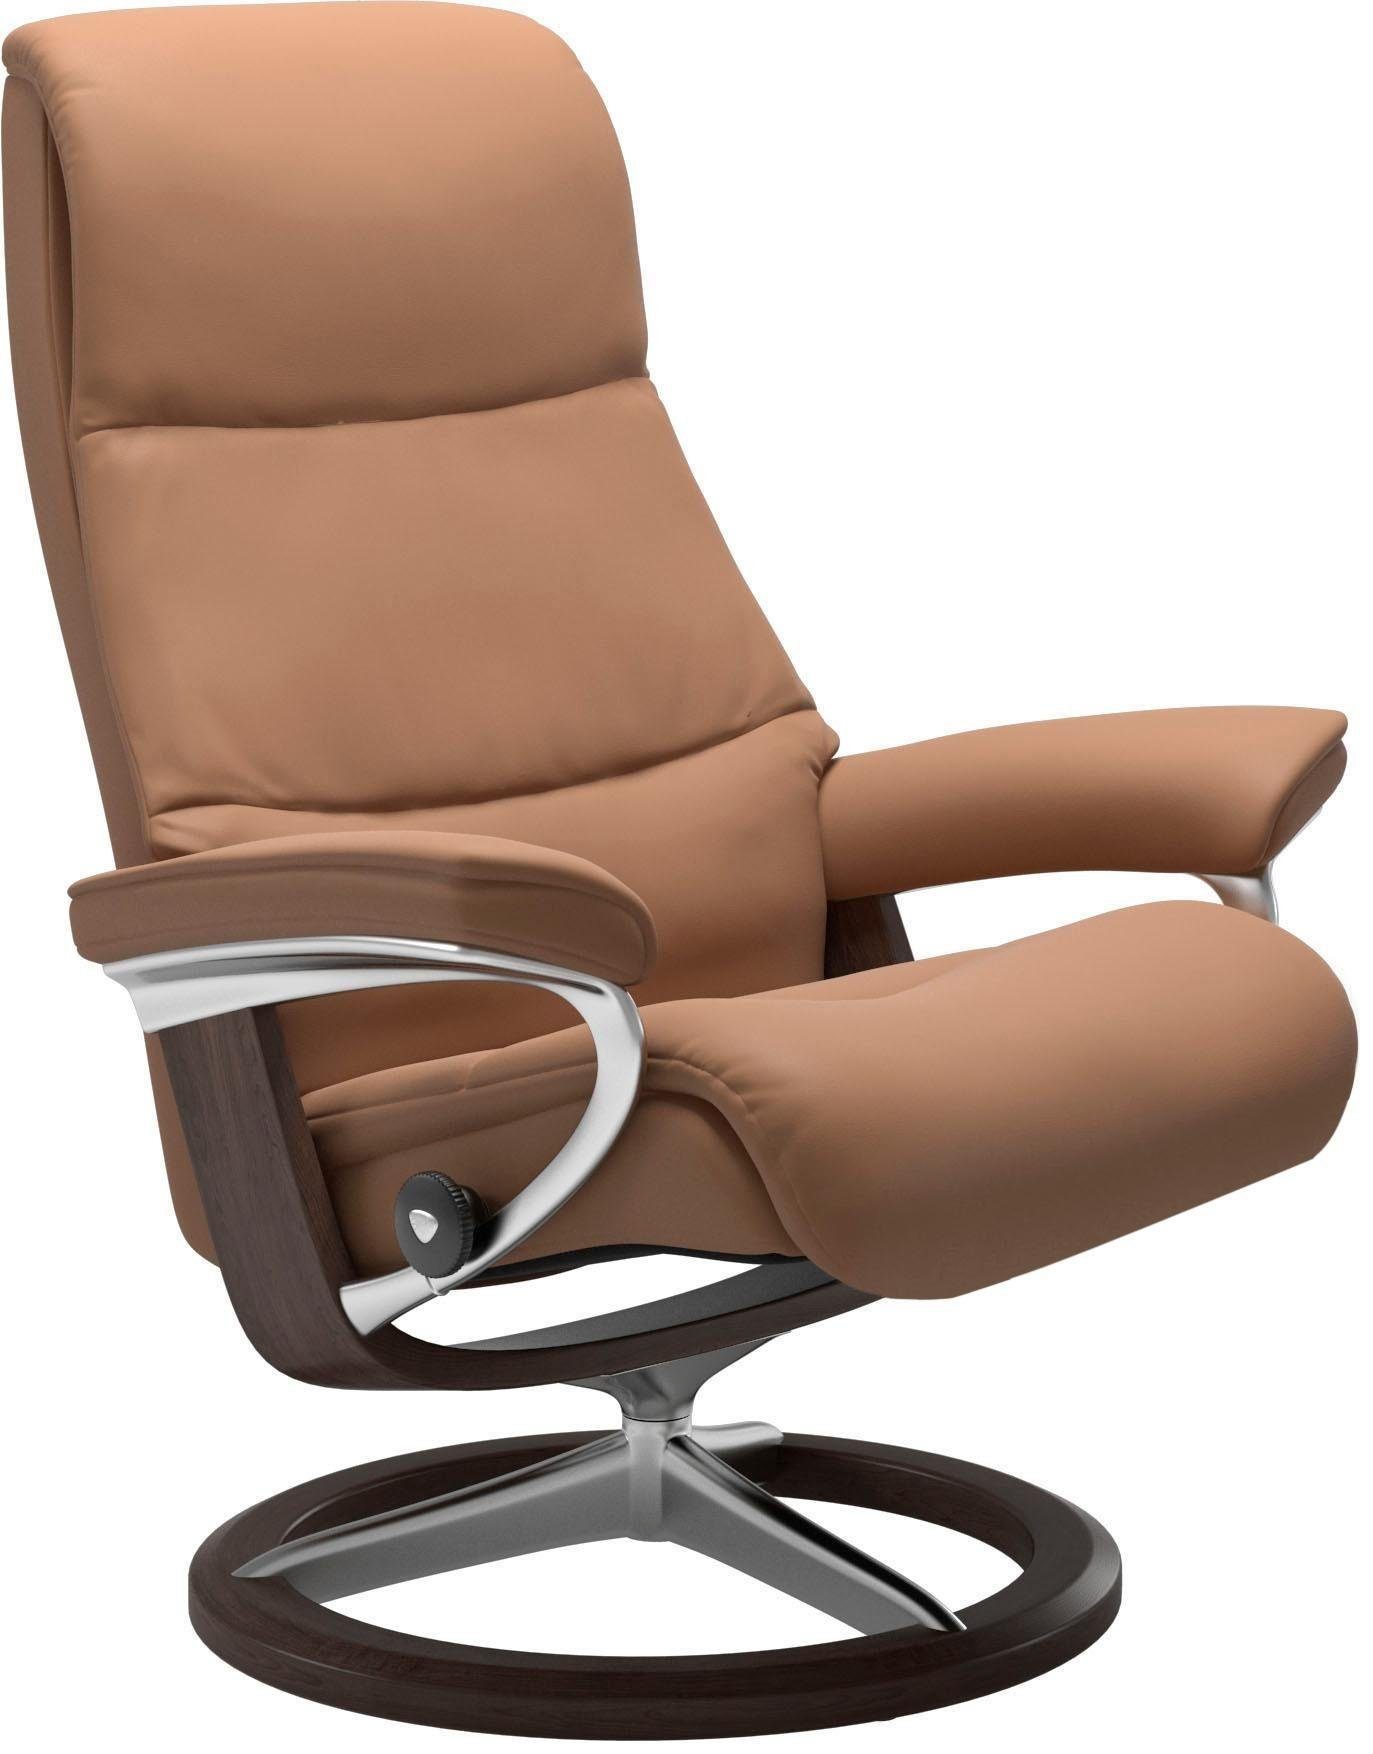 mit Größe L,Gestell Signature Relaxsessel Wenge View, Stressless® Base,